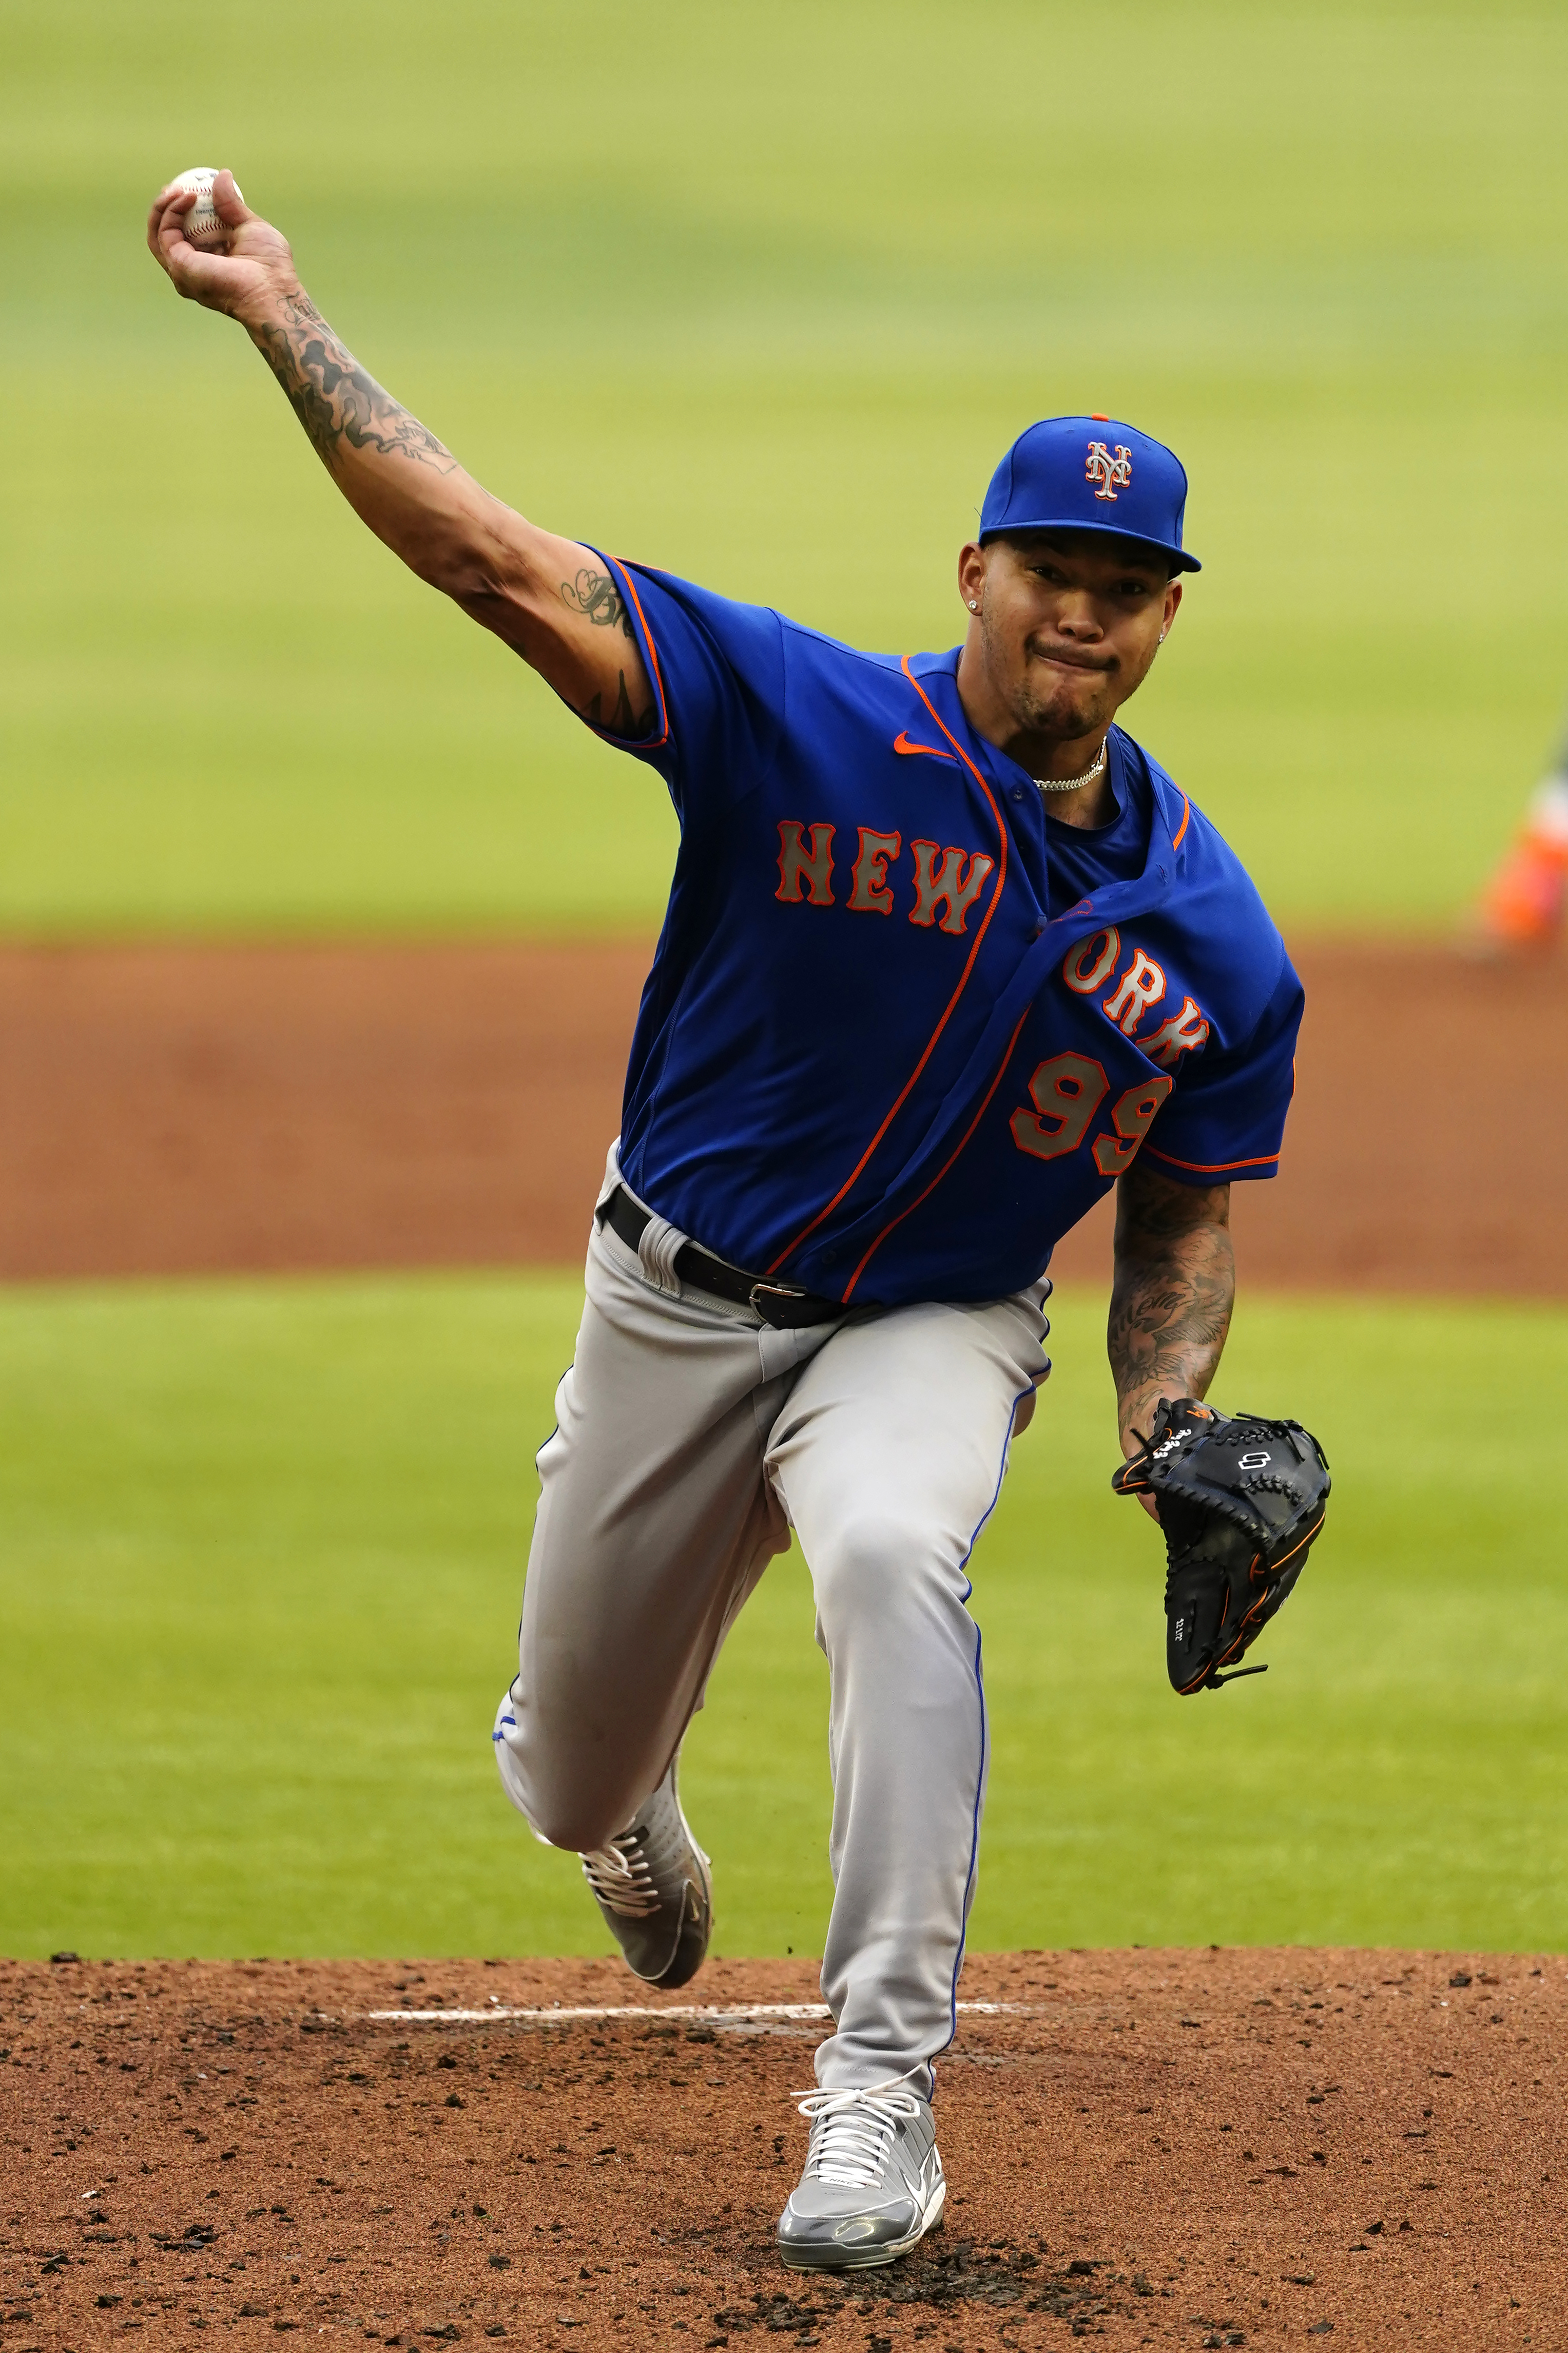 Mets' Pillar has multiple nasal fractures after hit by pitch – The Denver  Post